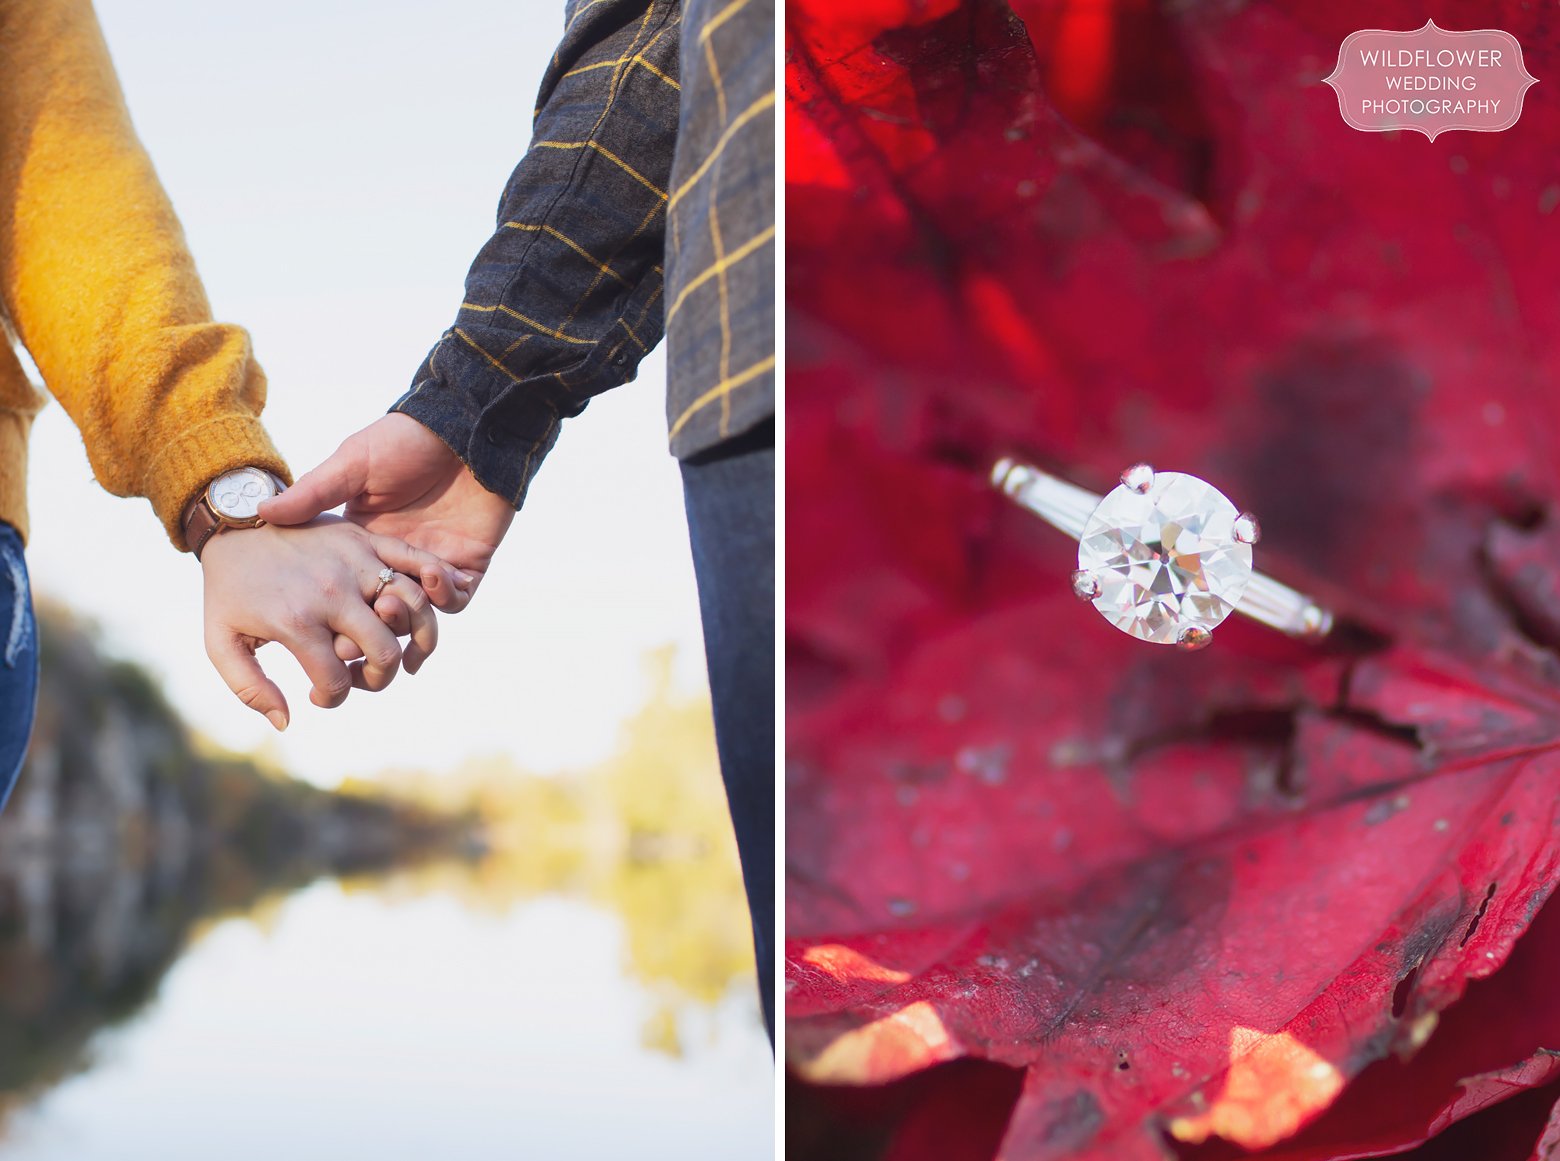 Romantic engagement photography at quarry wedding venue in Blackwater, MO.